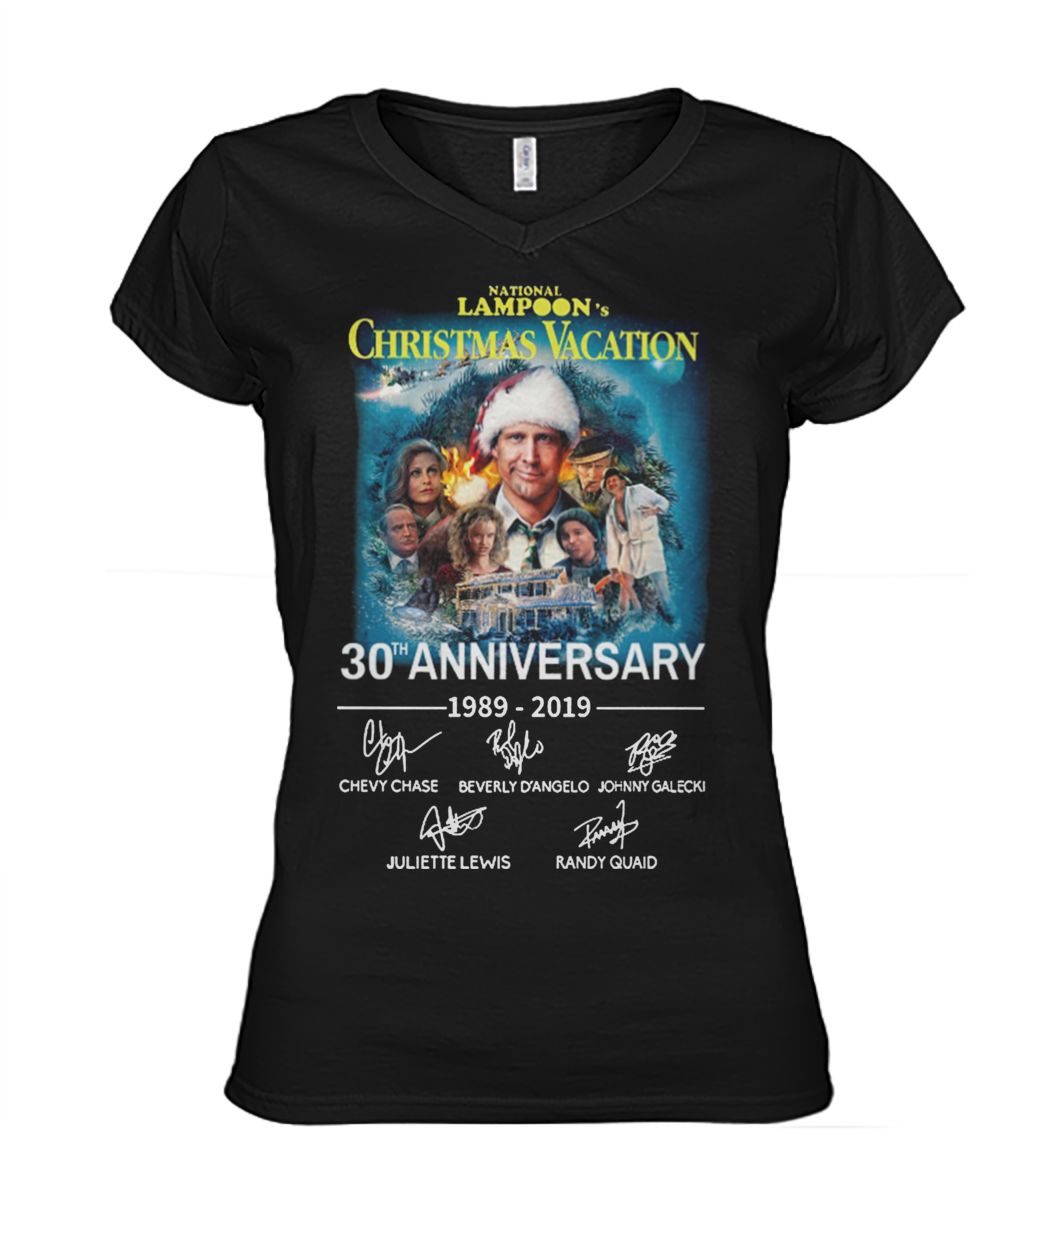 National lampoon's christmas vacation 30th anniversary 1989-2019 signatures women's v-neck